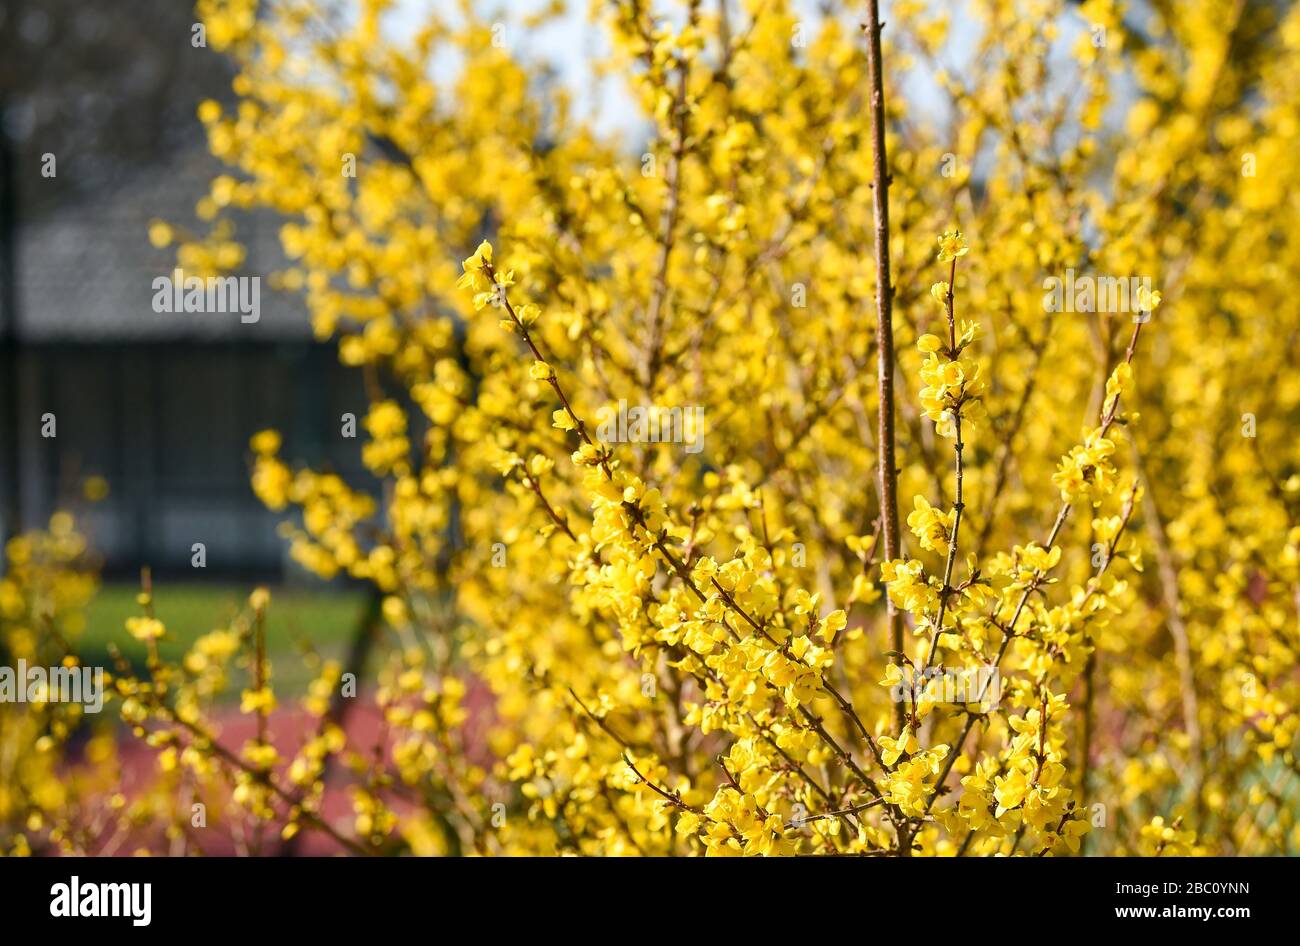 Yellow forsythia bush flowering in Spring sunshine Brighton UK Forsythia is a genus of flowering plants in the olive family Oleaceae  Photograph tak Stock Photo